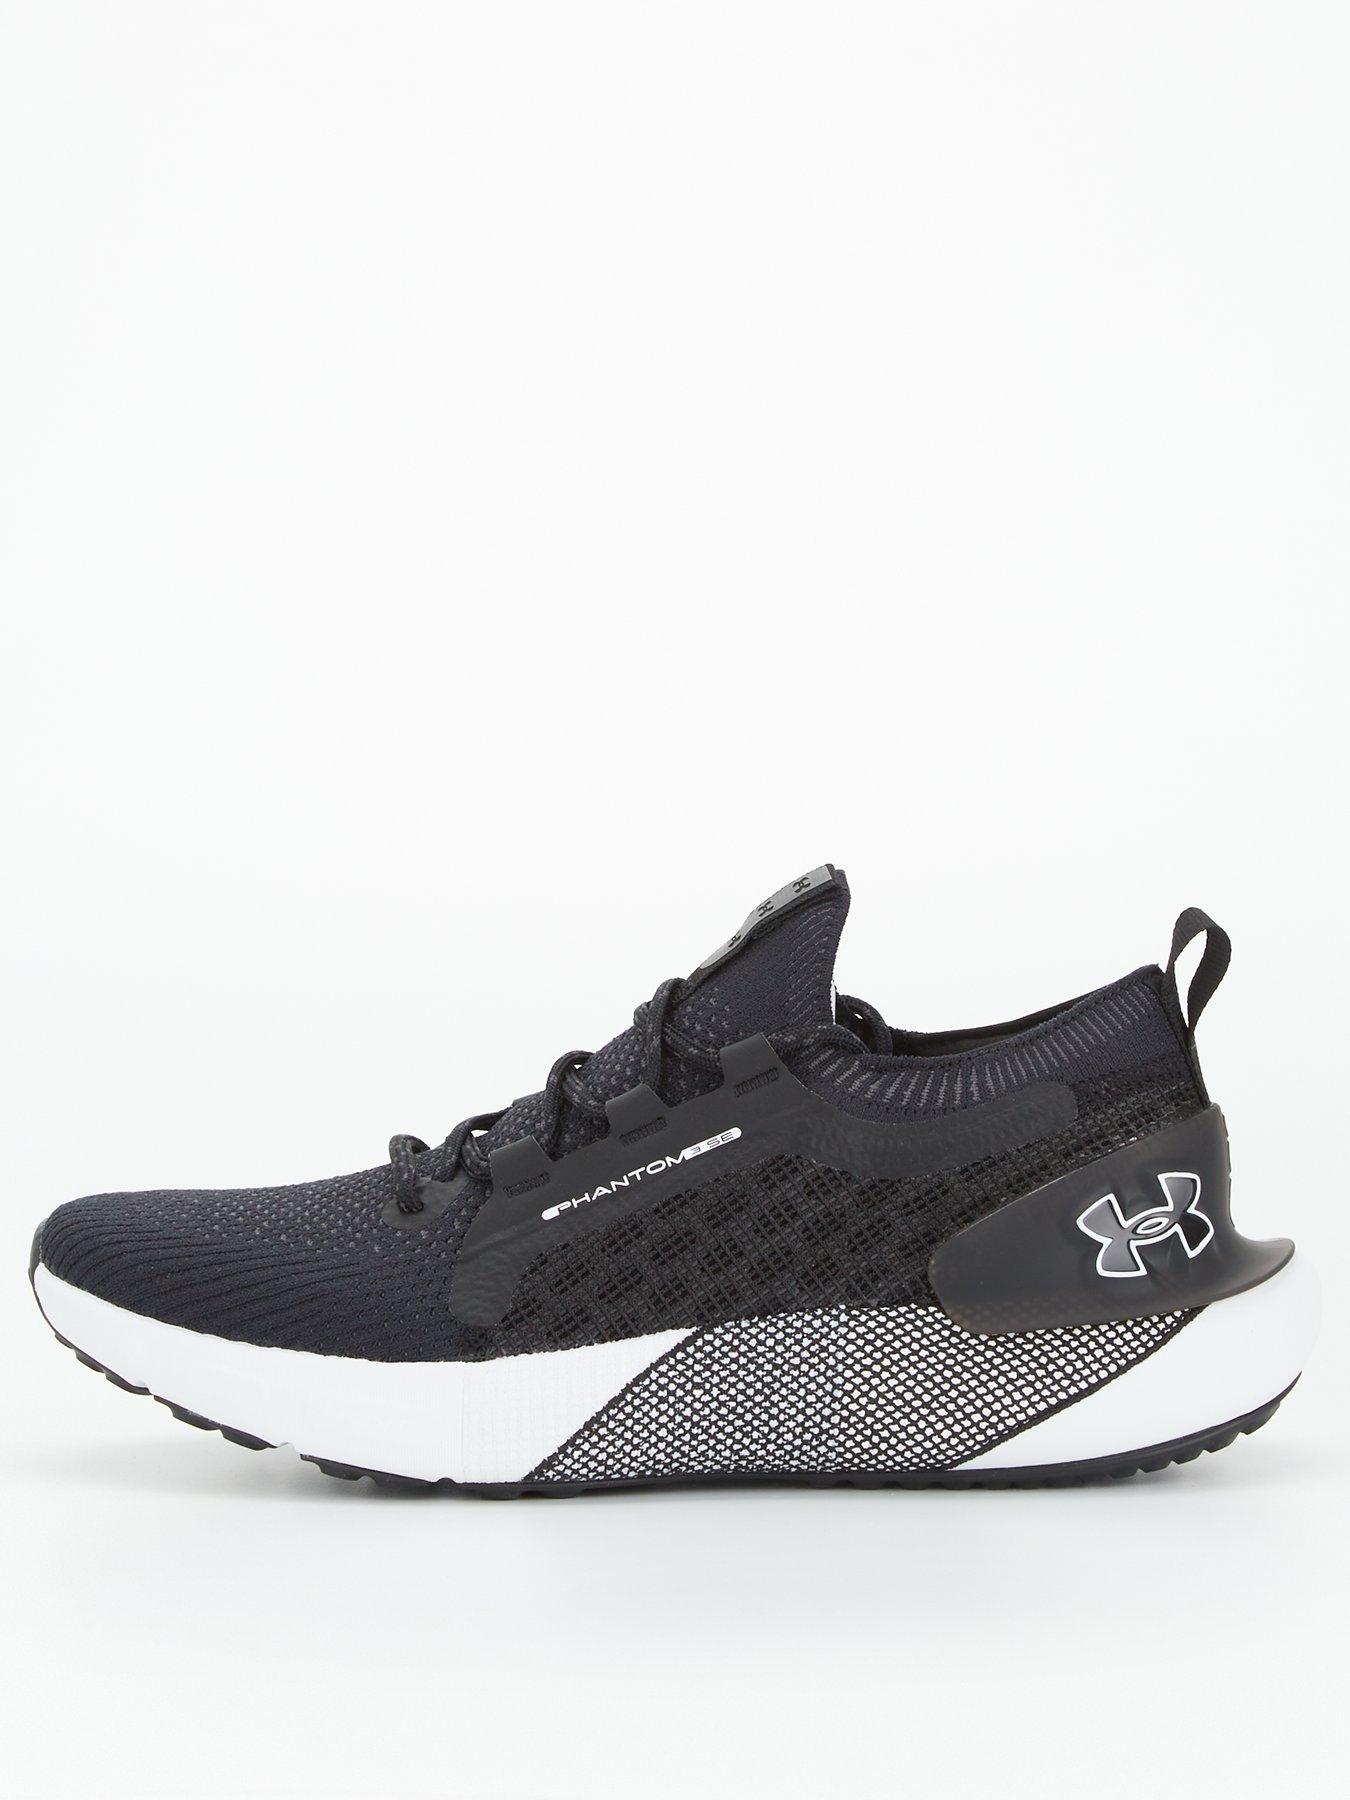 UNDER ARMOUR Men's Running Charged Pursuit 3 - BLACK/BLACK